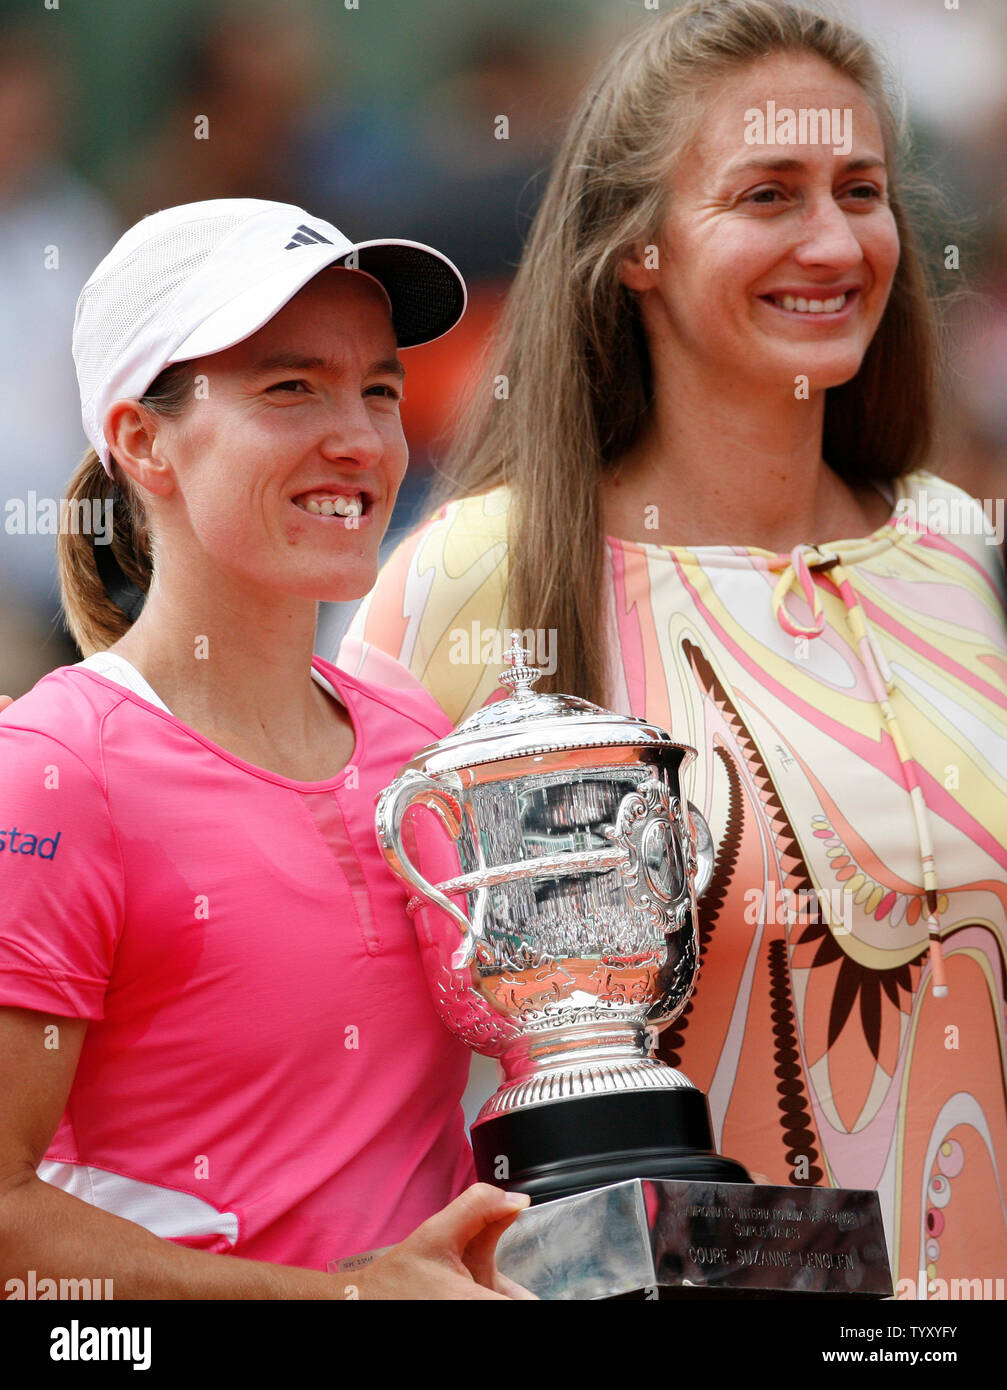 Belgian Justine Henin (L) holds the championship trophy while posing with former French Open champion Mary Pierce after Henin won her final round match against Serbian Ana Ivanovic at the French Open at Roland Garros in Paris on June 9, 2007.   Henin, the top seed, defeated the seventh-seeded Ivanovic in straight sets 6-1, 6-2 to win her third straight French Open Championship.   (UPI Photo/ David Silpa) Stock Photo